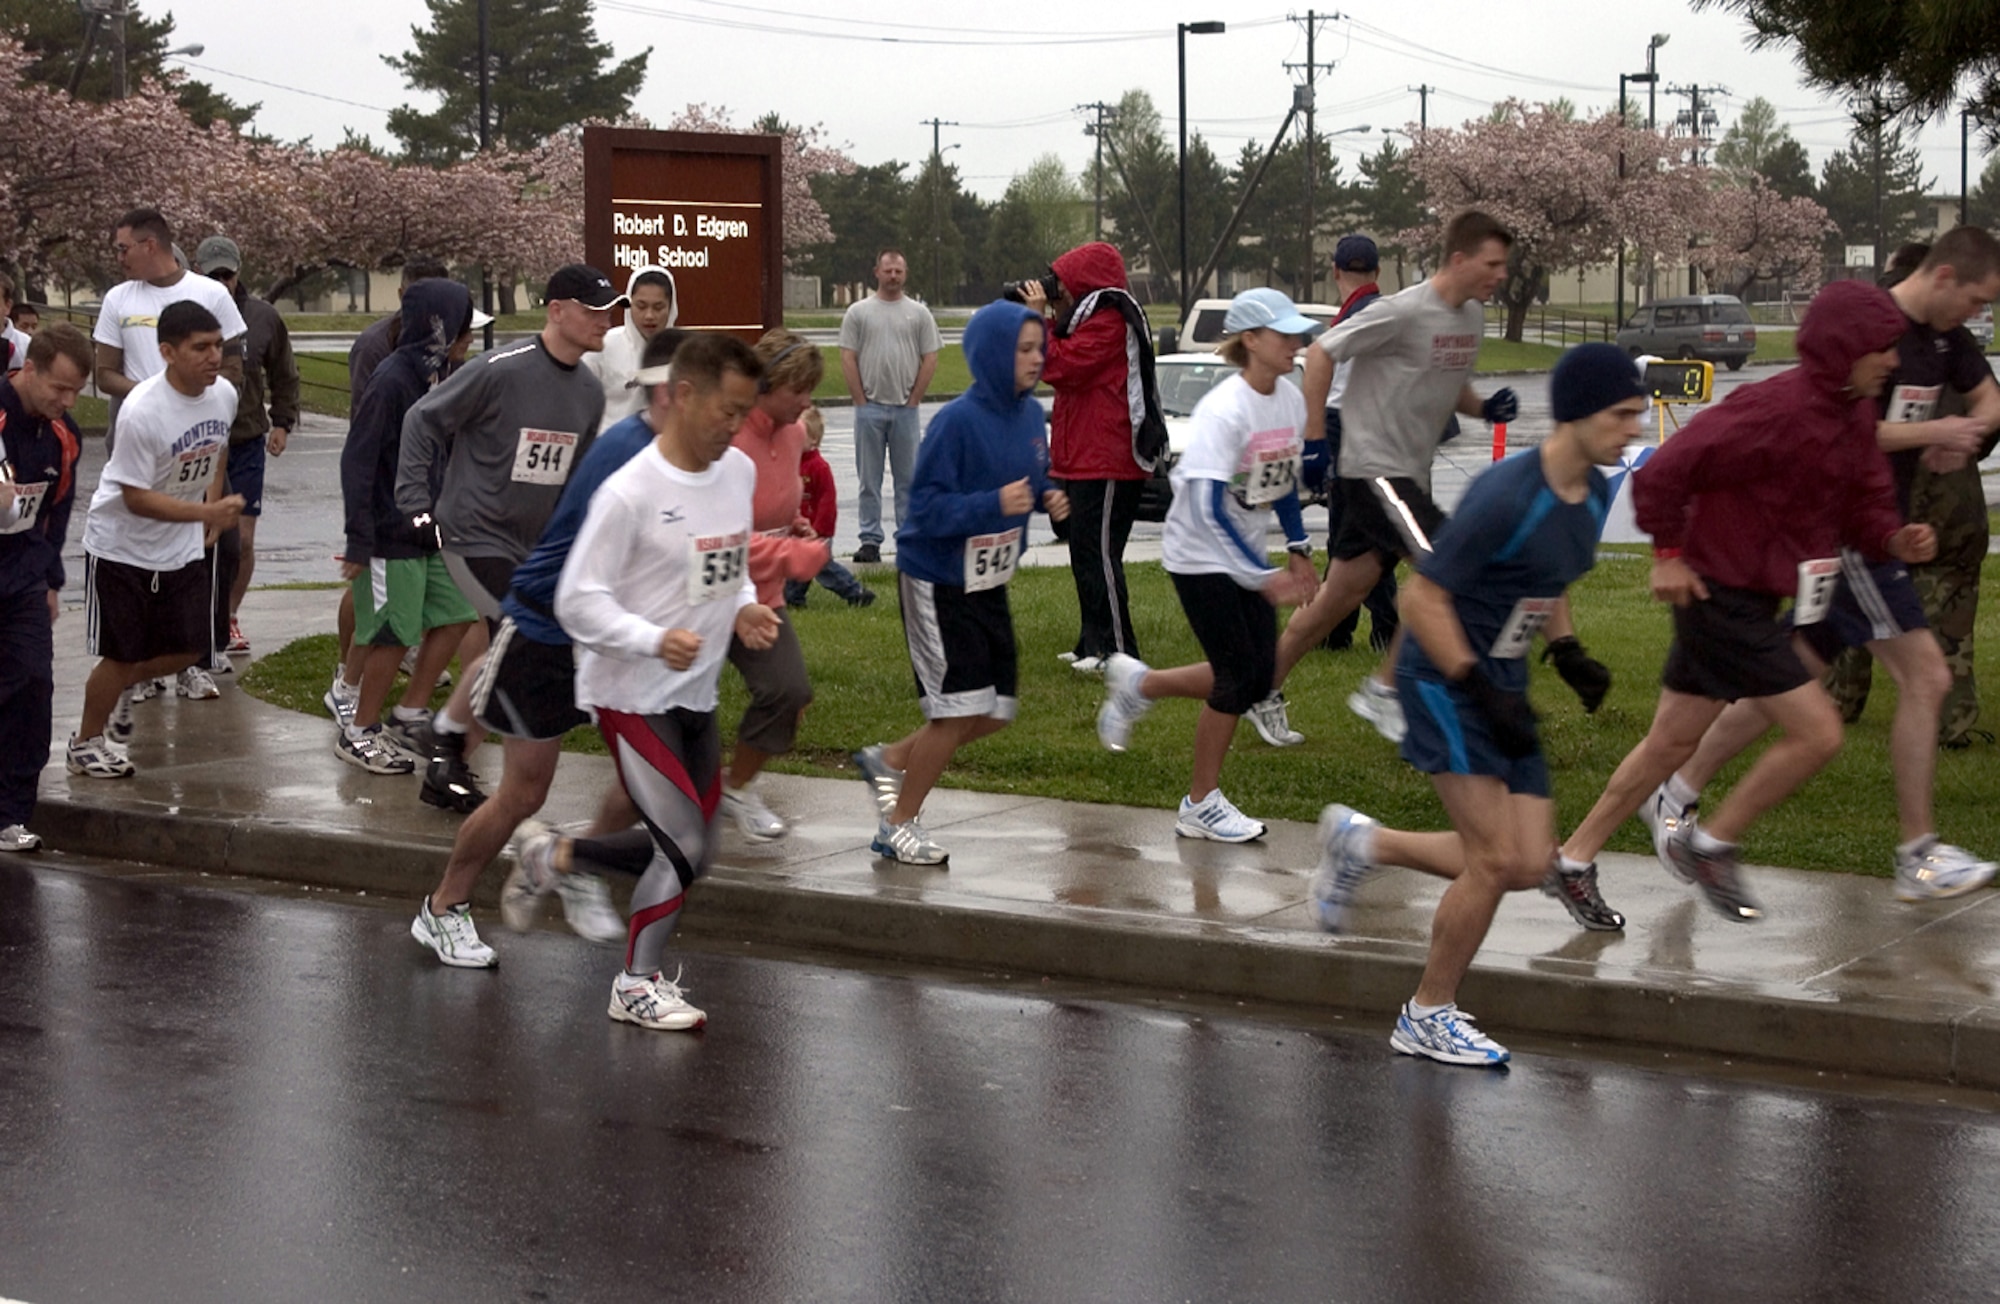 MISAWA AIR BASE JAPAN -- Runners begin their race in front of Edgren High School on here May 19. Runners that have numbers are registered to run to promote May Fitness Month. Forty-nine runners braved the blistery cold and rainy weather to run either a 5 or 10 kilometers. The run was organized by Potter Fitness Center with the help of the Asian-Pacific Heritage committee. The first place male runner was Kristoffer Chacon, 35th Services Squadron, with a time of 38:40. The first place female runner was Valerie Bell, 35th Operations Support Squadron, with a time of 46:53. Also placing in second and third were in both categories were Benjamin Chirlin, 35th Civil Engineer Squadron, with a time of 40:34 and Teiichi Horiuchi, 35th CES, with a time of 41:39 in the male category. In the female category, second place went to Lori Grant, family member, with a time of 49:41 and in third placeTeresa Giustino, family member, with a time 49:36. (U.S. Air Force photo by Airman 1st Class Eric Harris) 